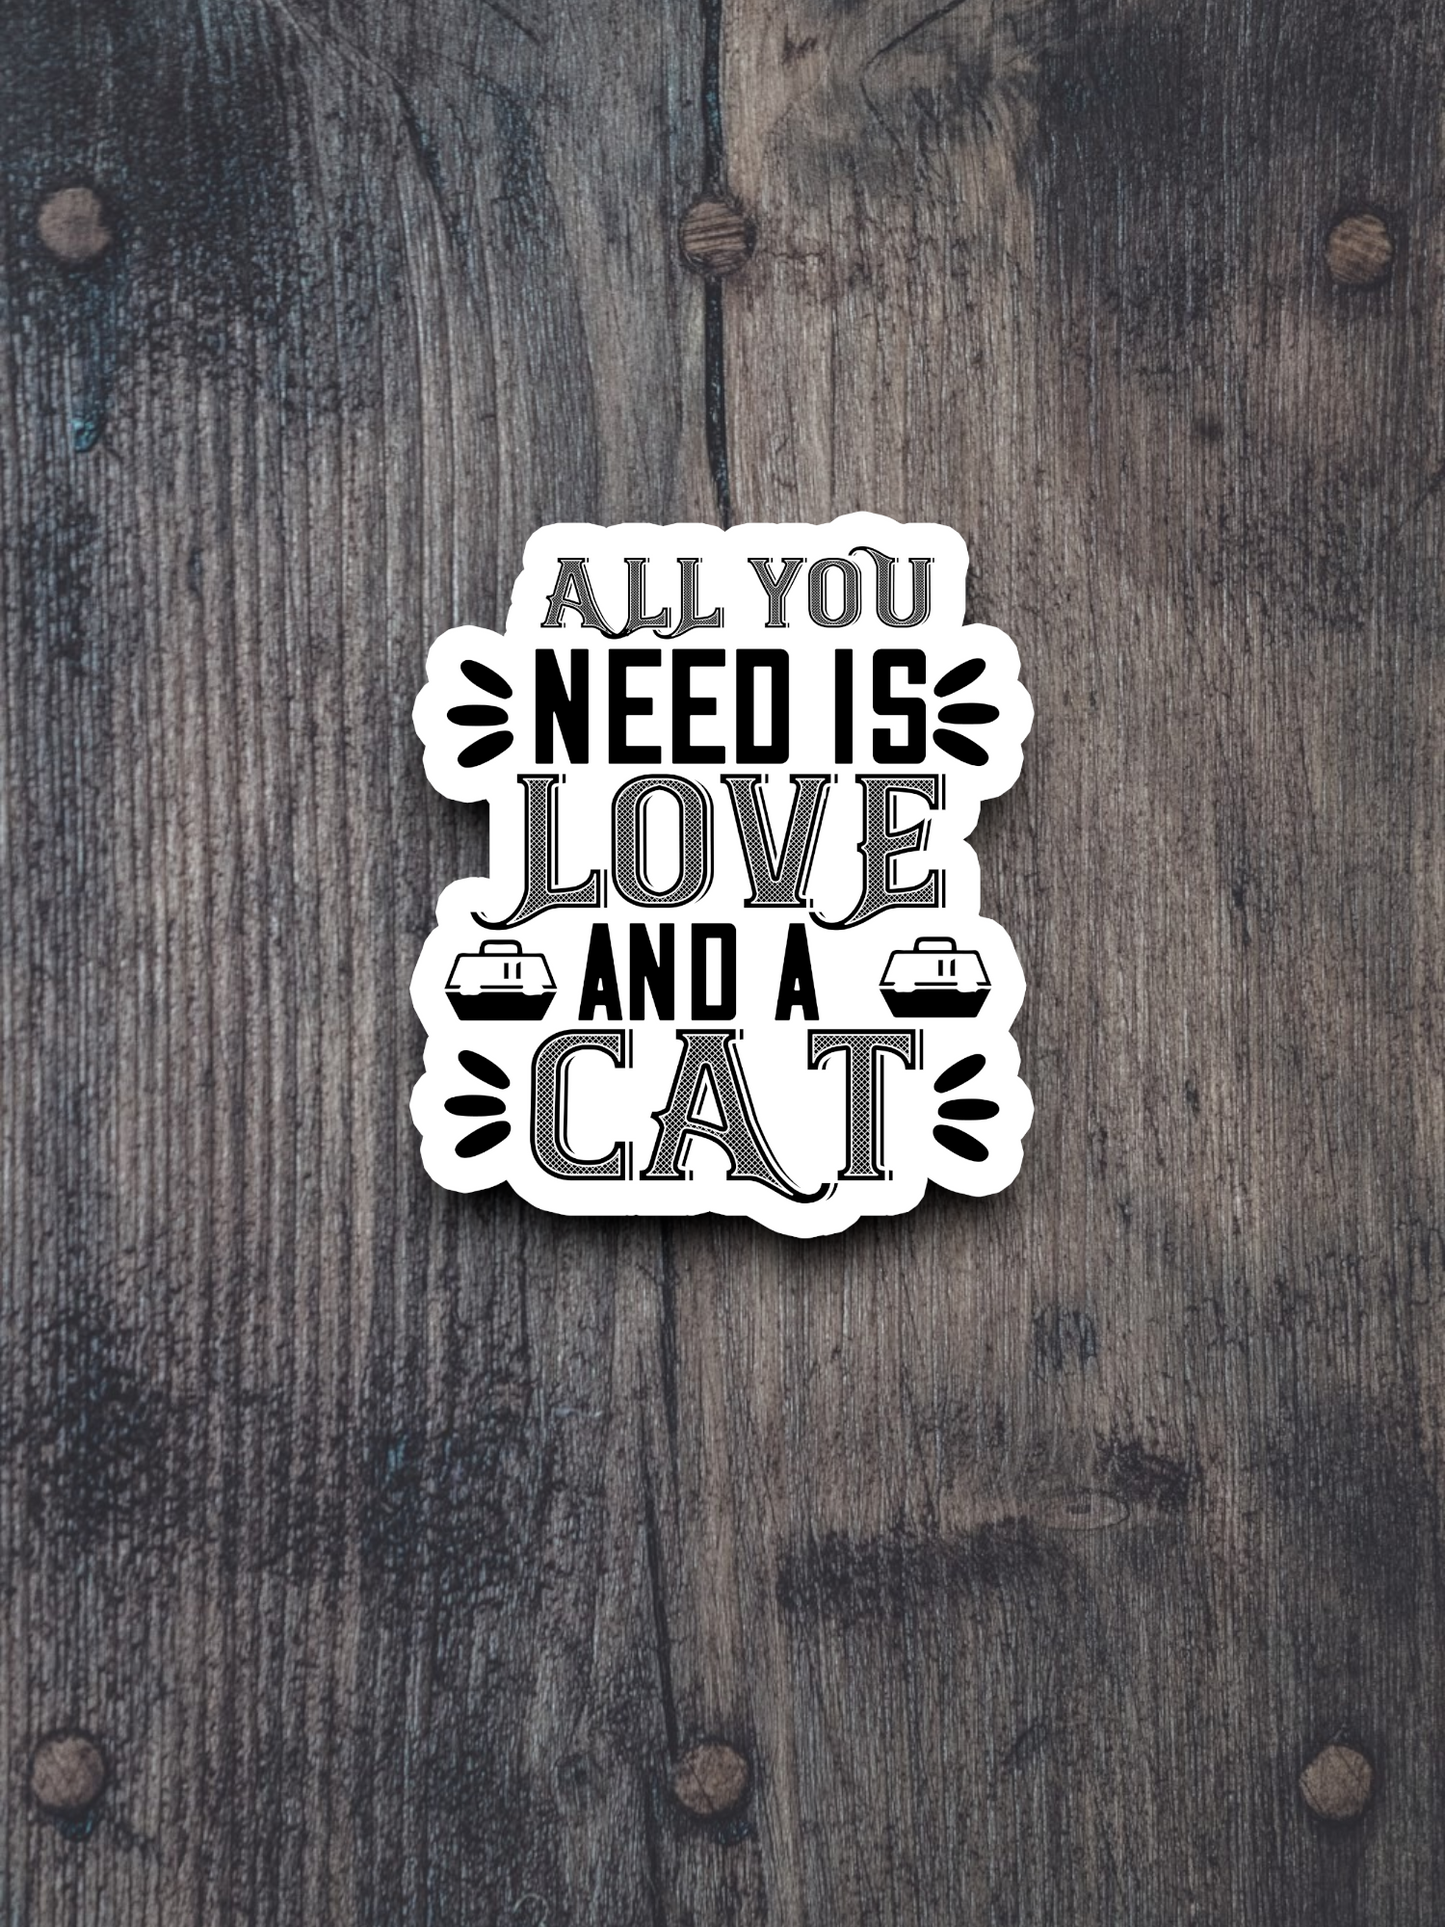 All You Need is Love and a Cat Sticker